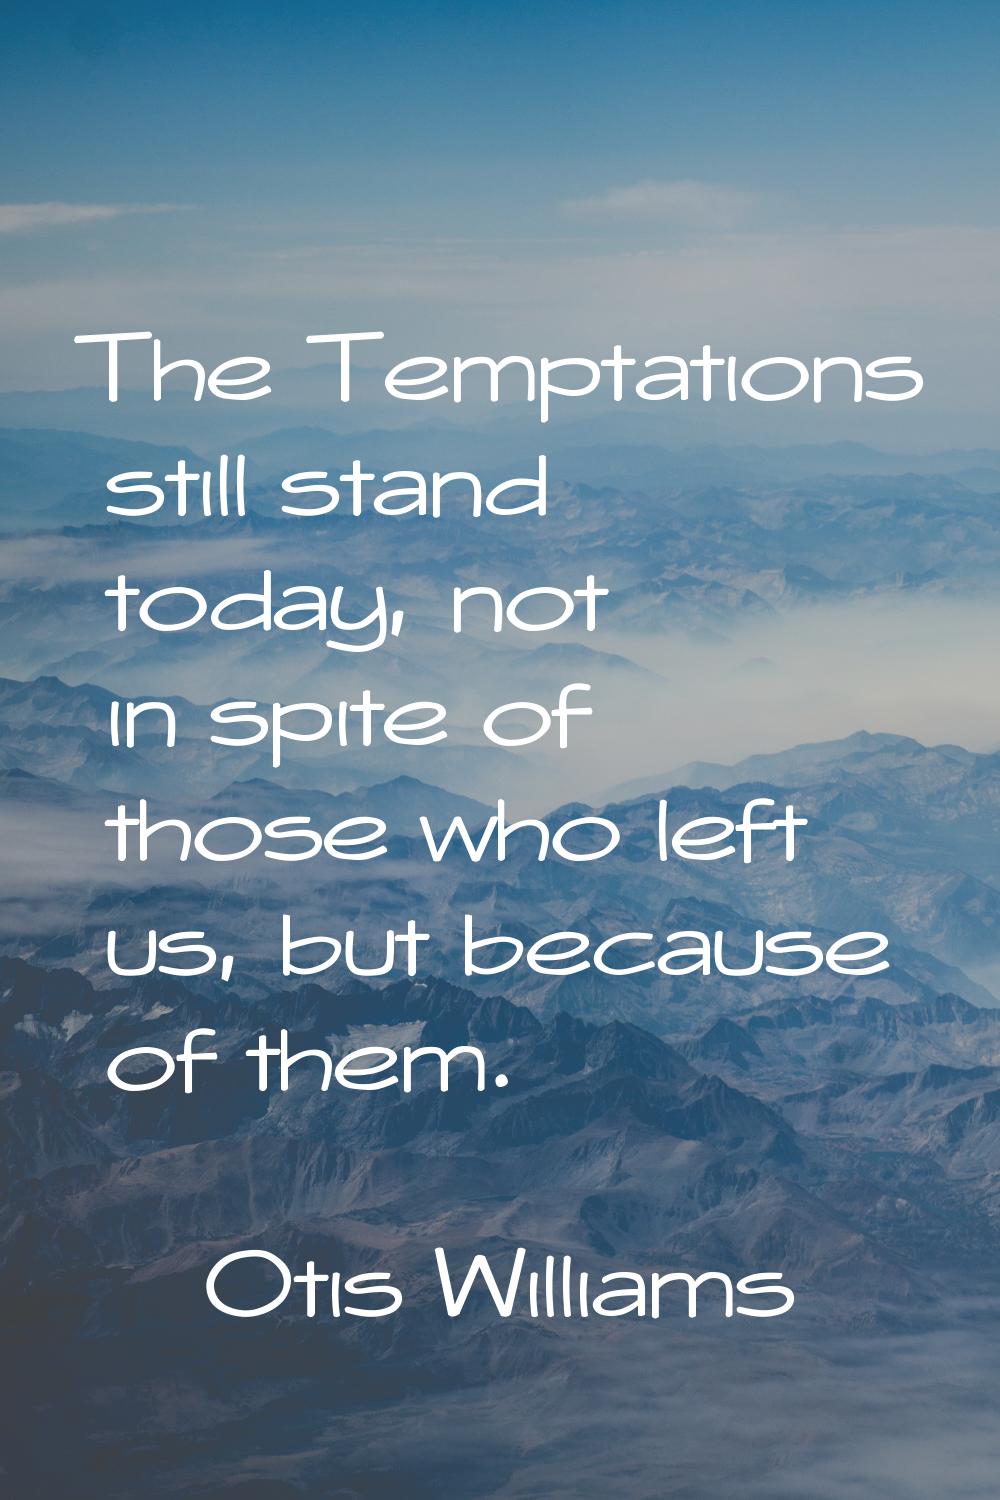 The Temptations still stand today, not in spite of those who left us, but because of them.